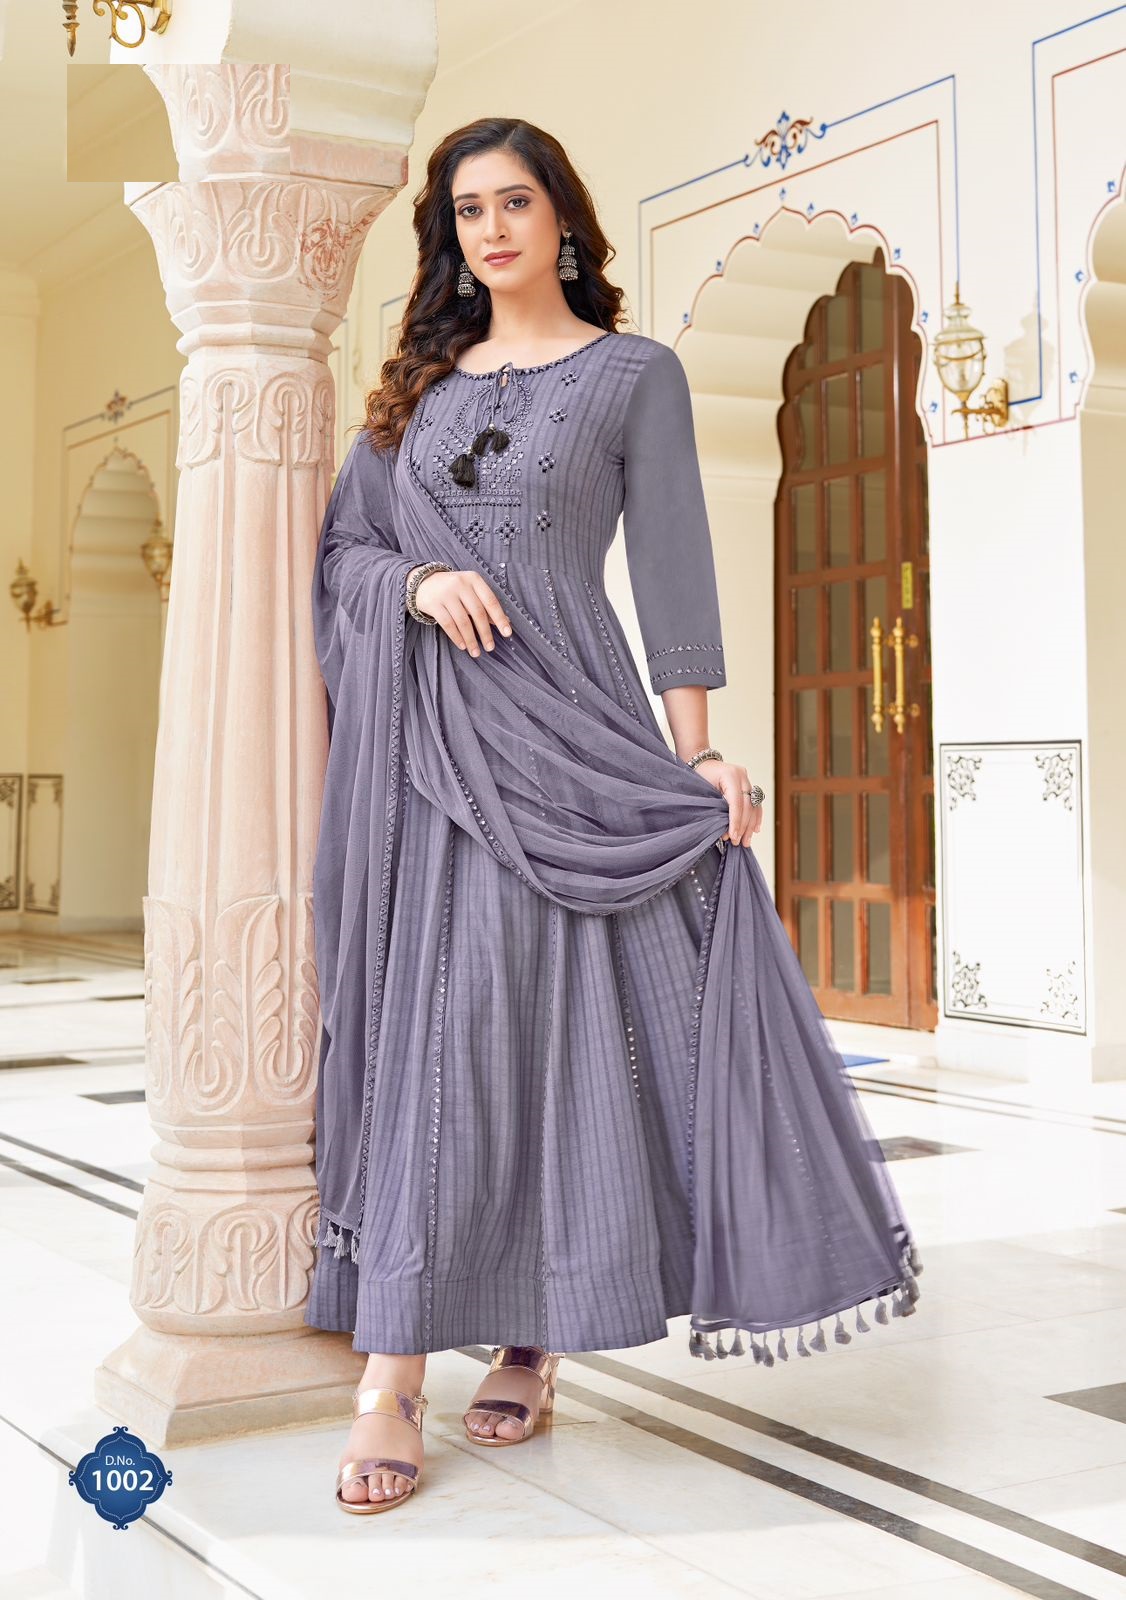 Fancy Viscose Weaving with Embroidery and Handwork and pure net dupatta Kurtis